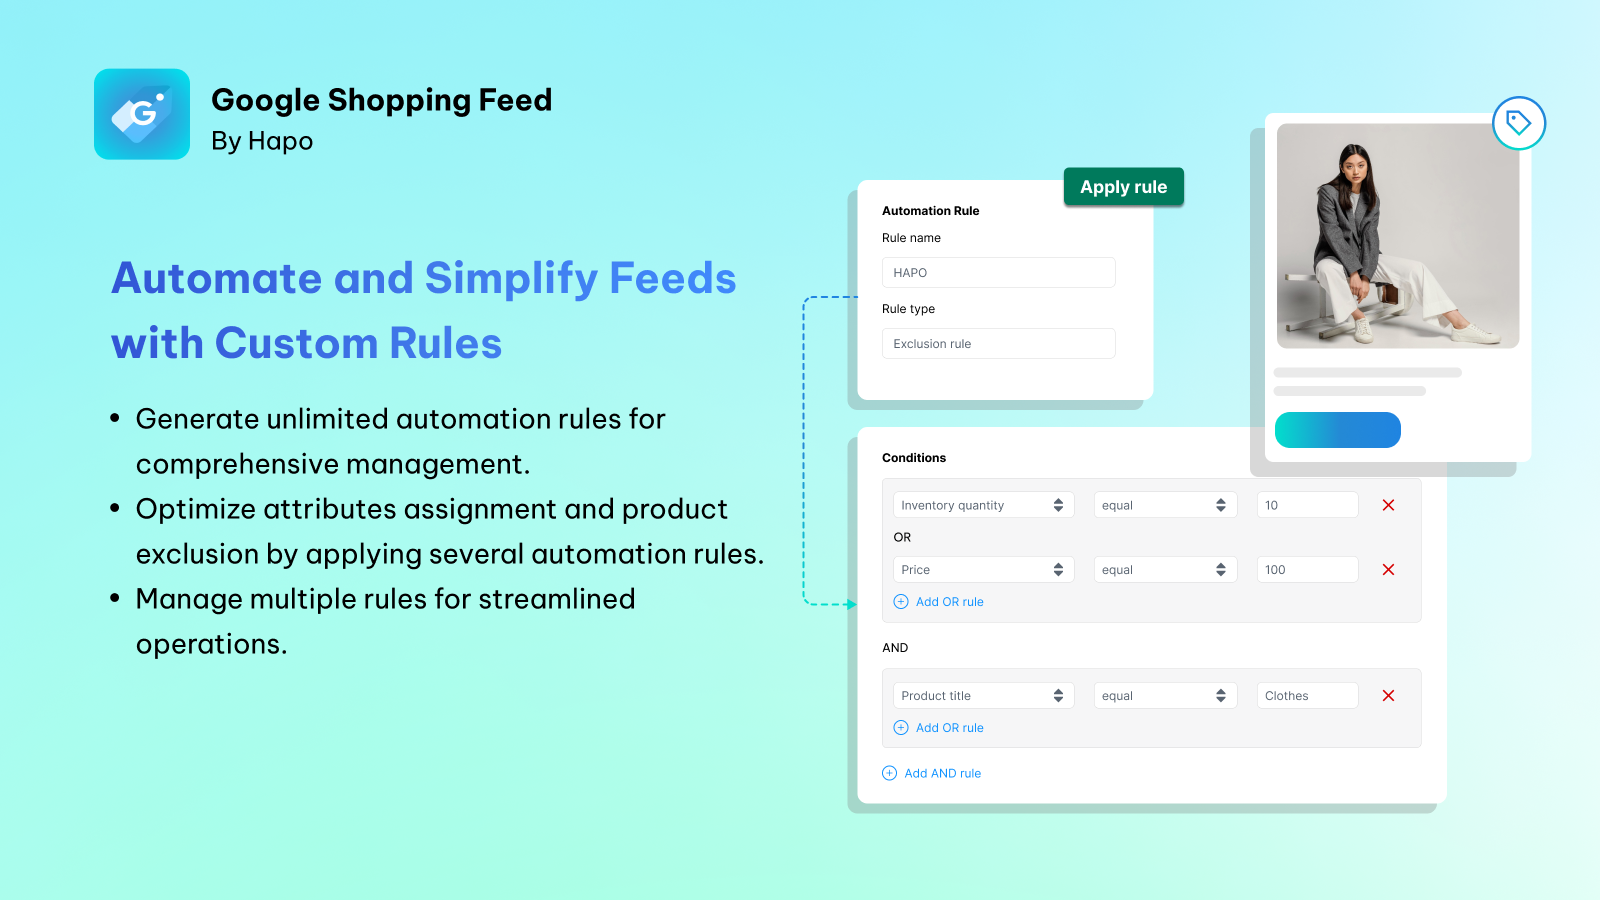 Automate and Simplify Feeds with Custom Rules.